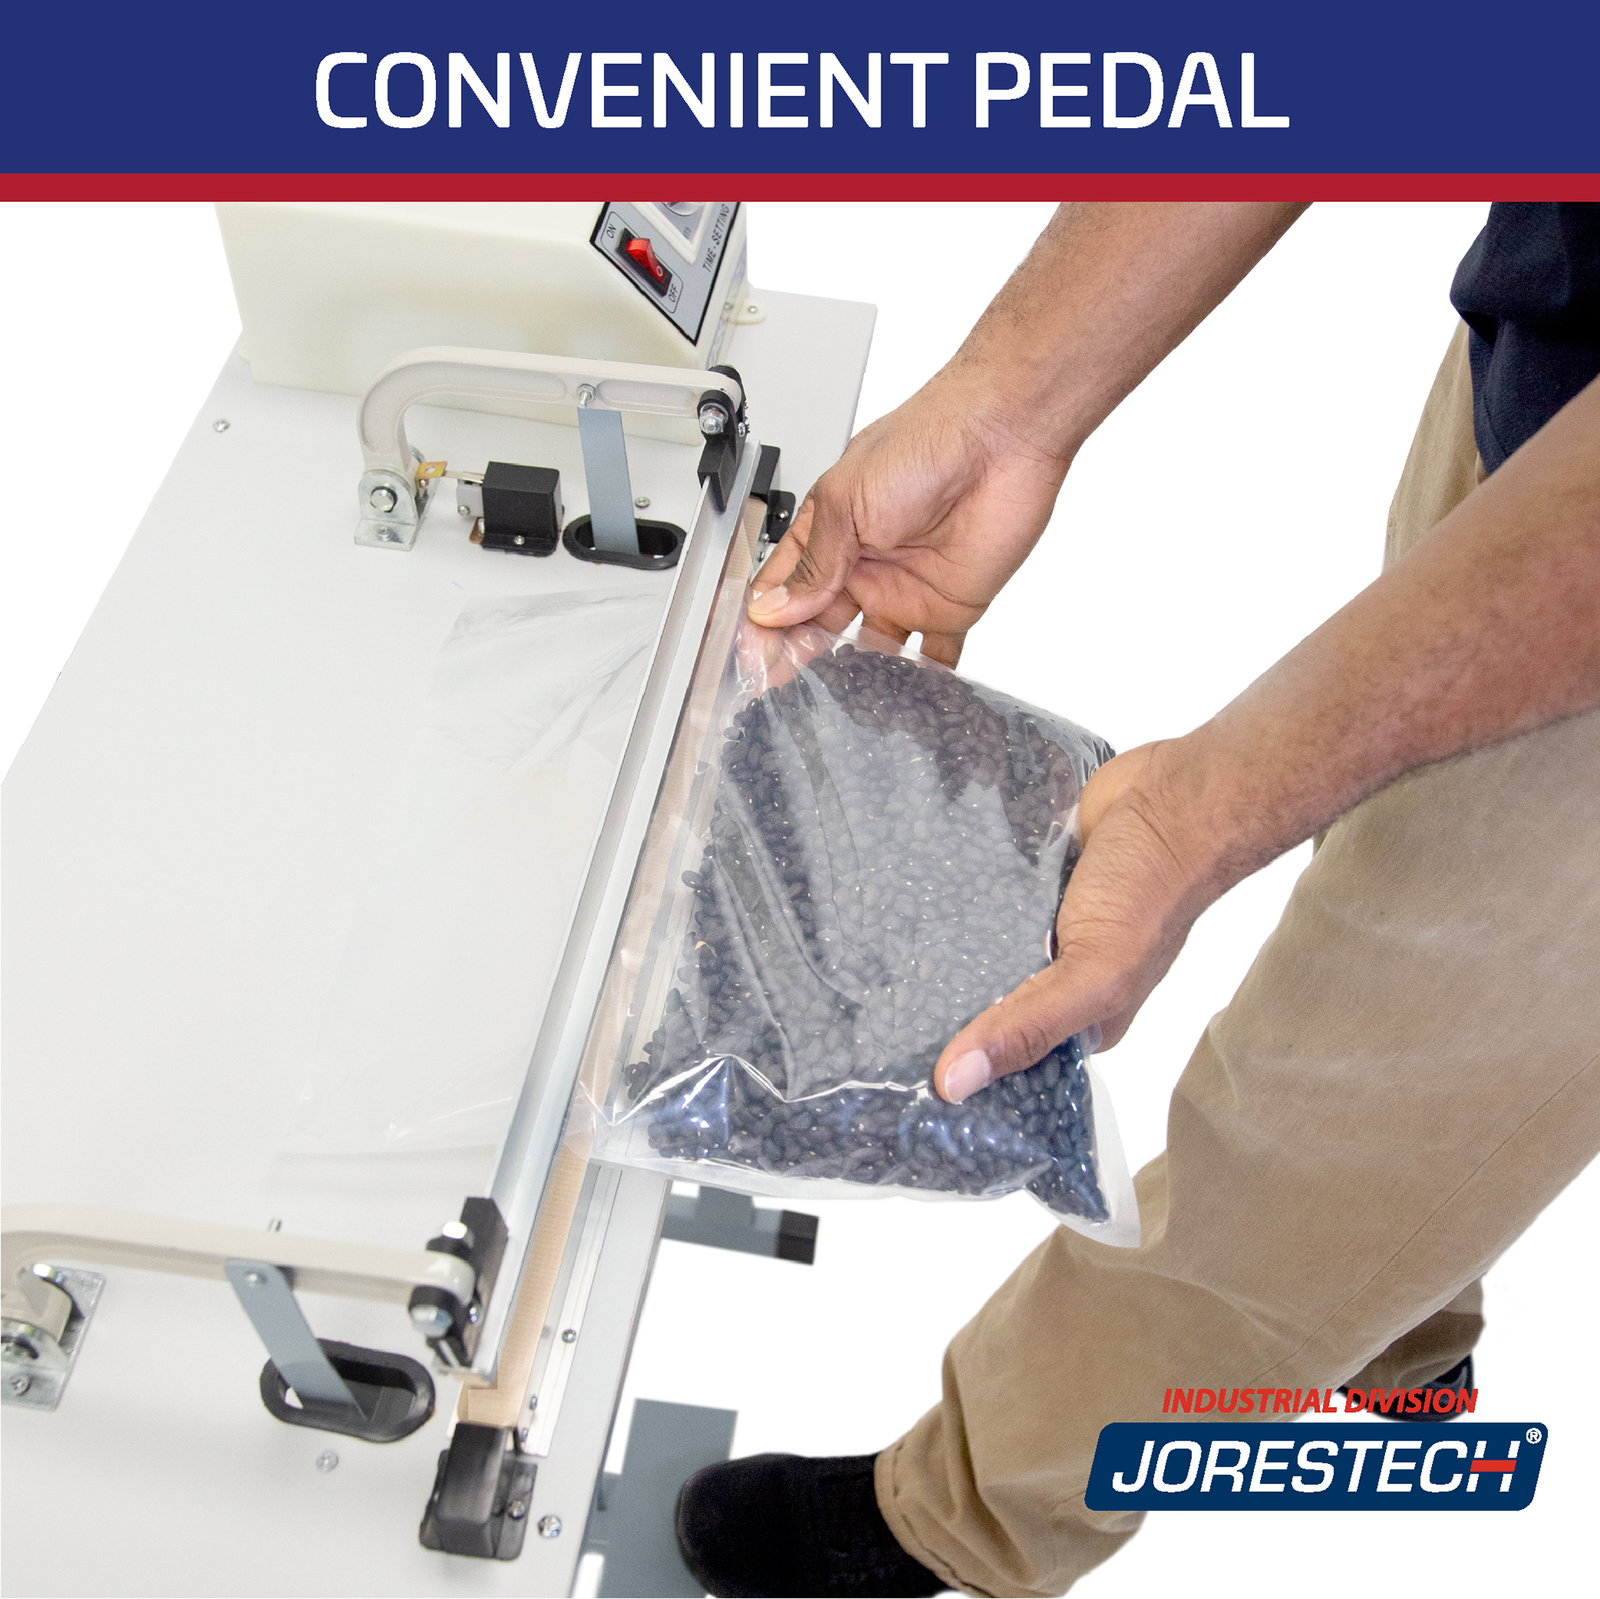 Title reads: “Convenient Pedal” shows a bag full of black beans being sealed with the Jorestech impulse foot sealer. 